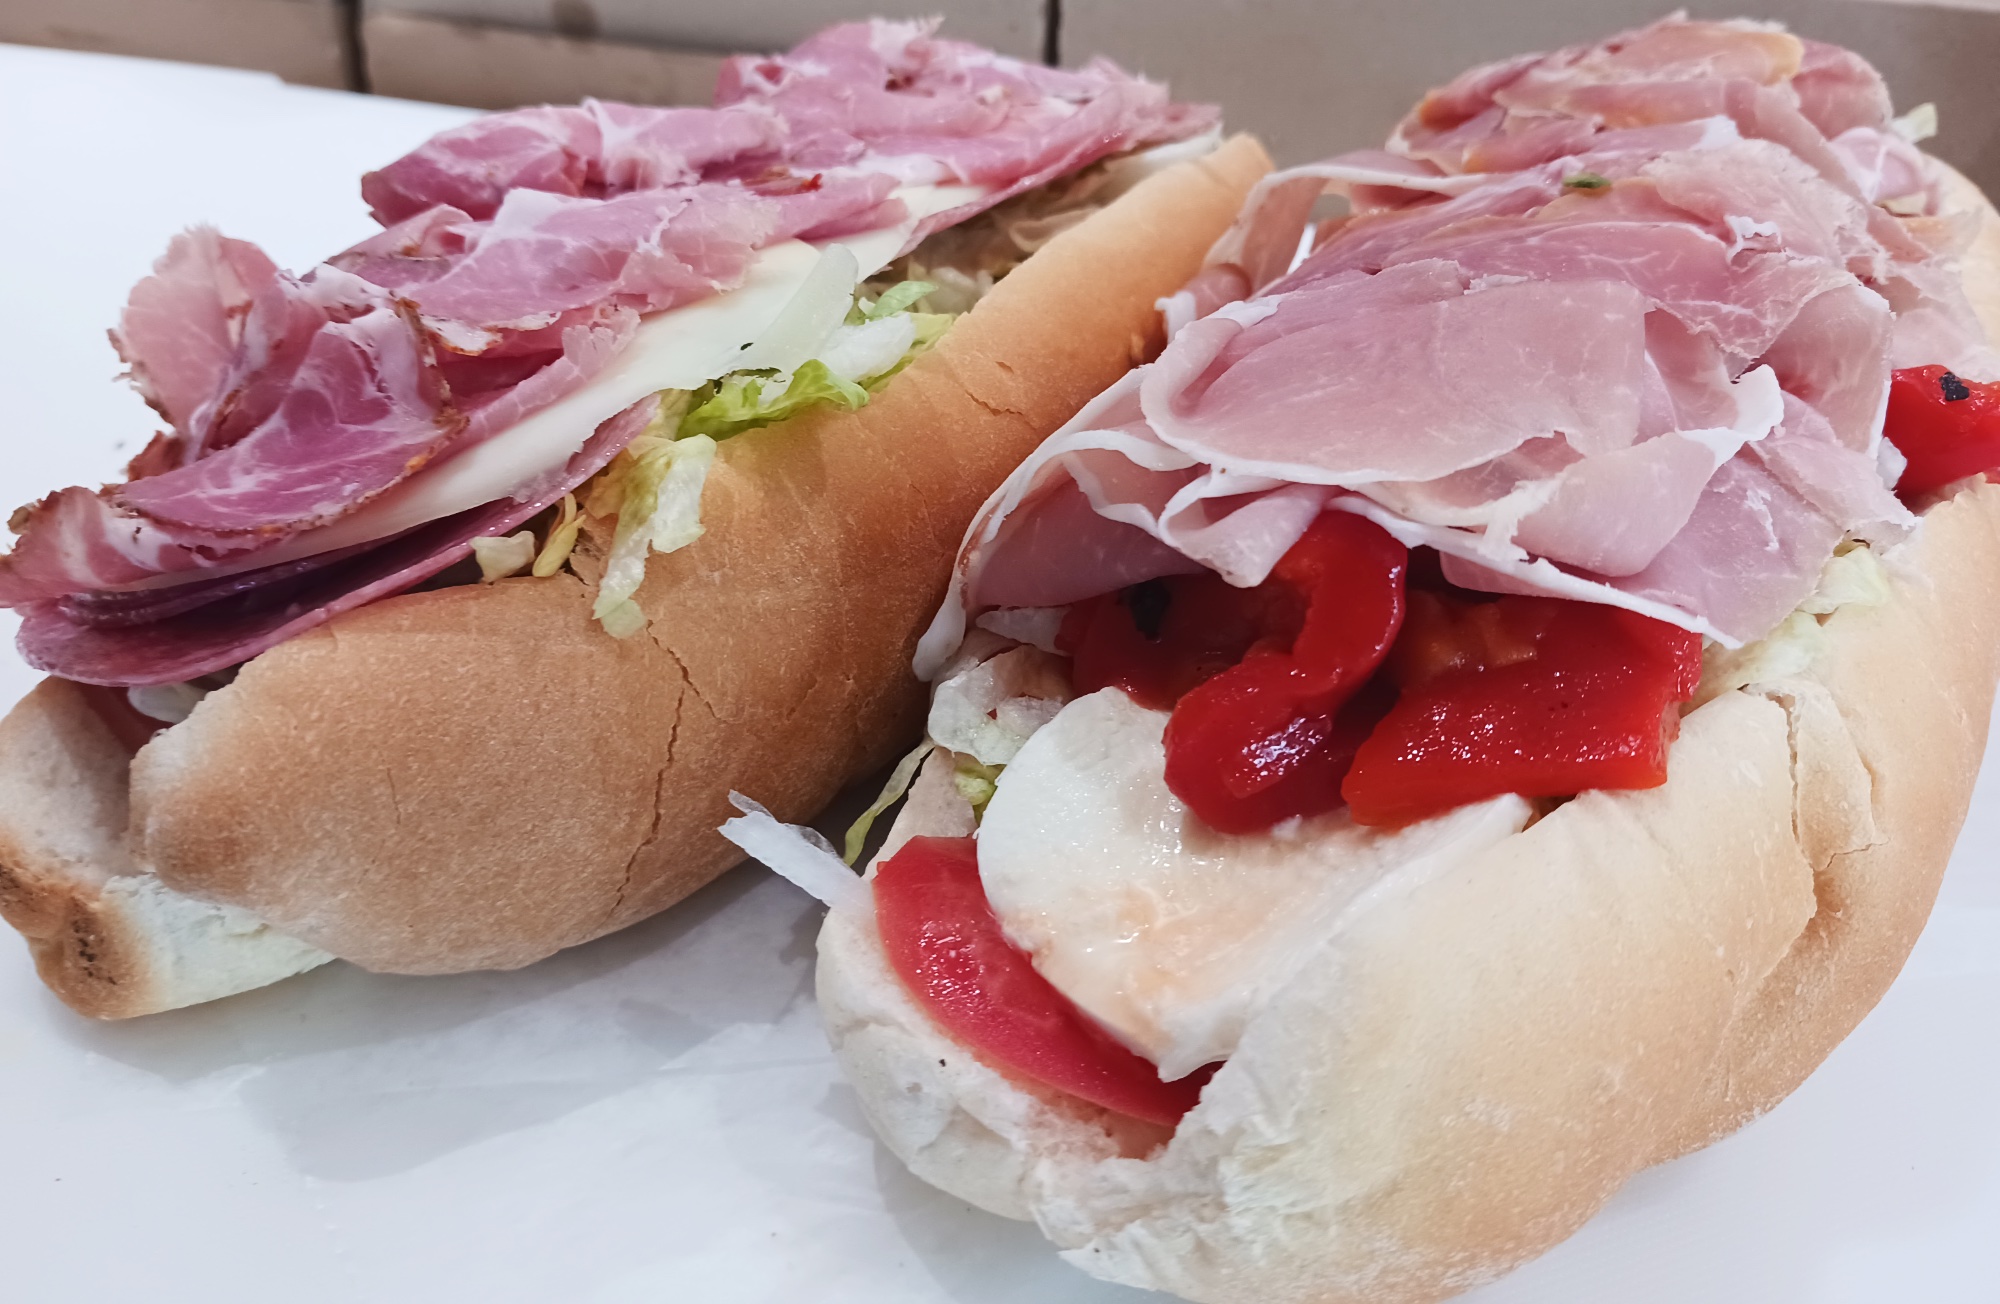 Imported Prosciutto or Cappy Subs